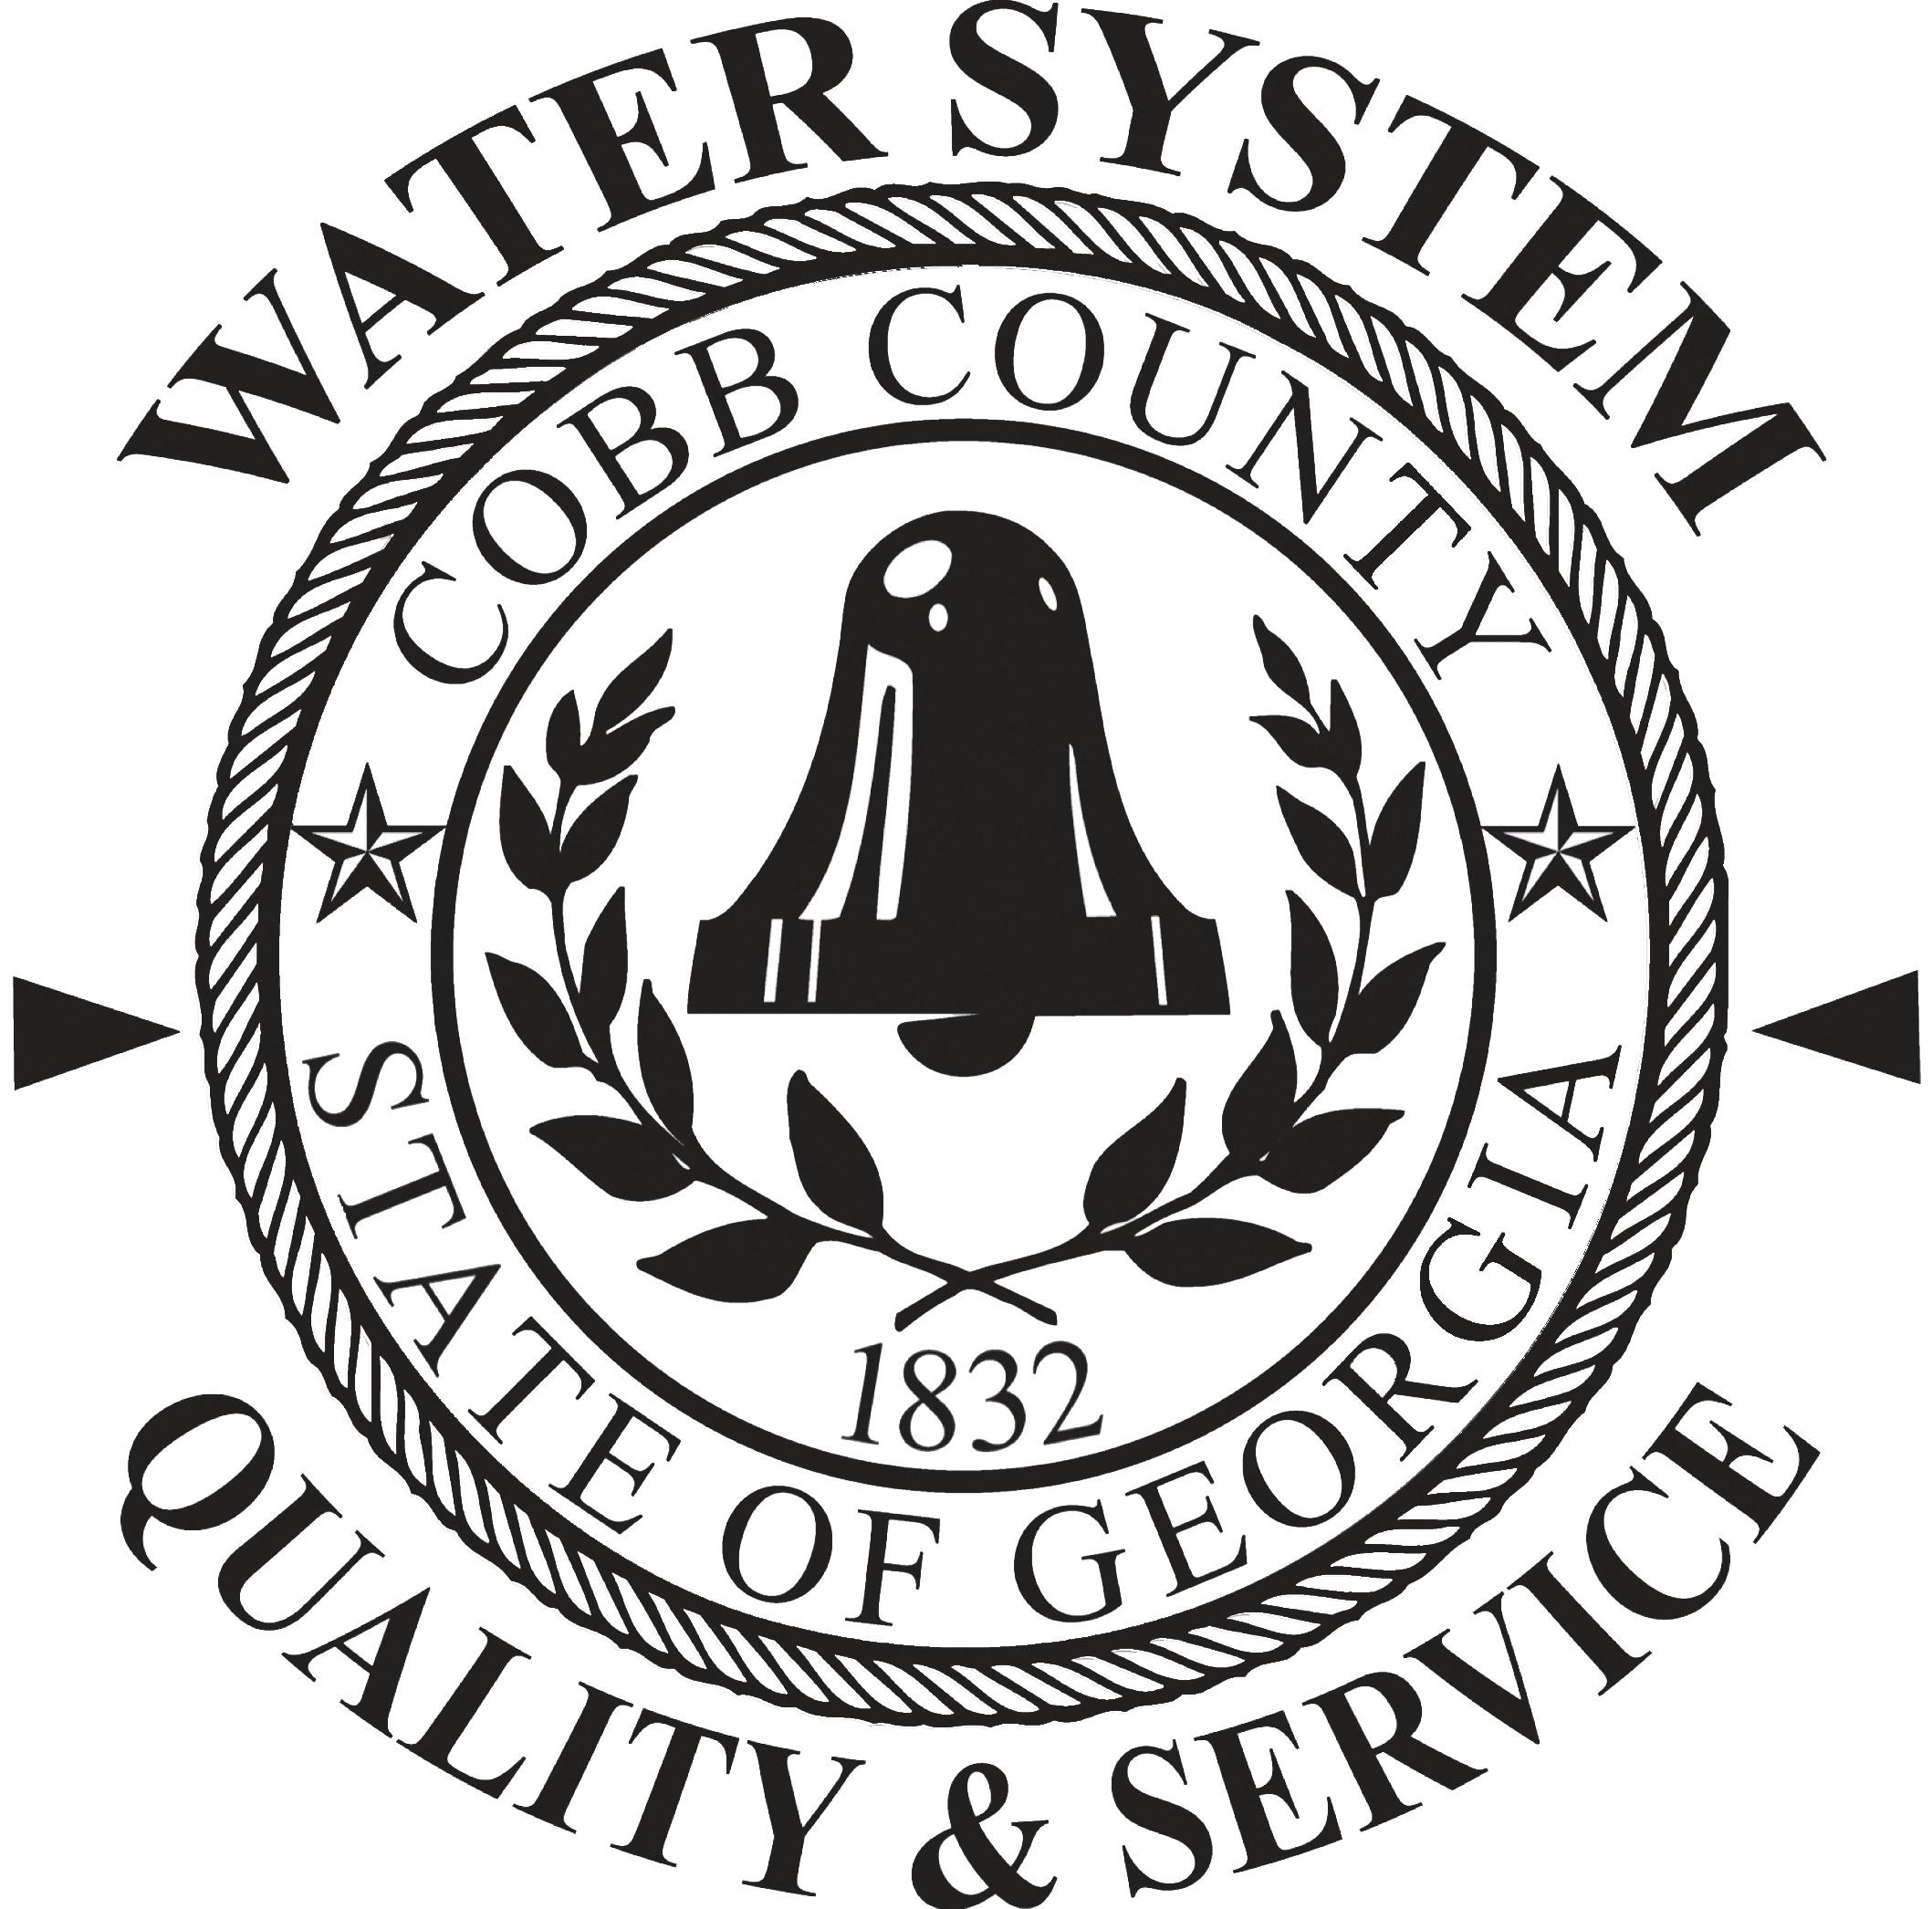 Cobb County Water System<br /><h5>Water Efficiency Program</h5>